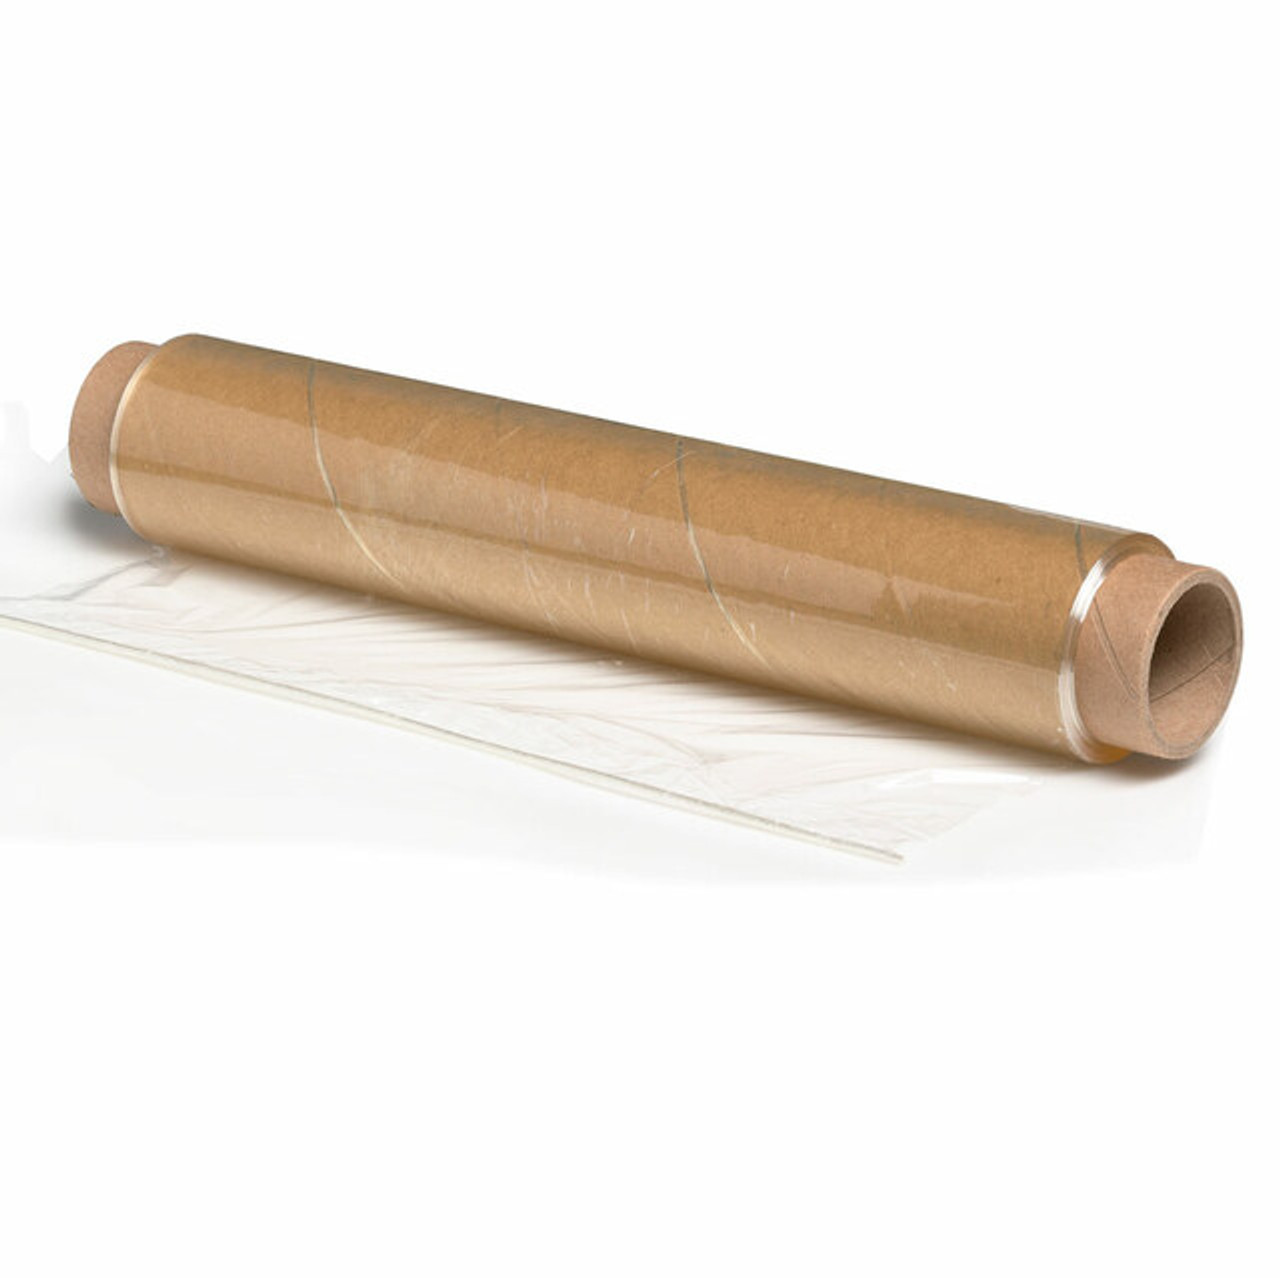 Refillable Parchment Roll and Dispenser - King Arthur Baking Company